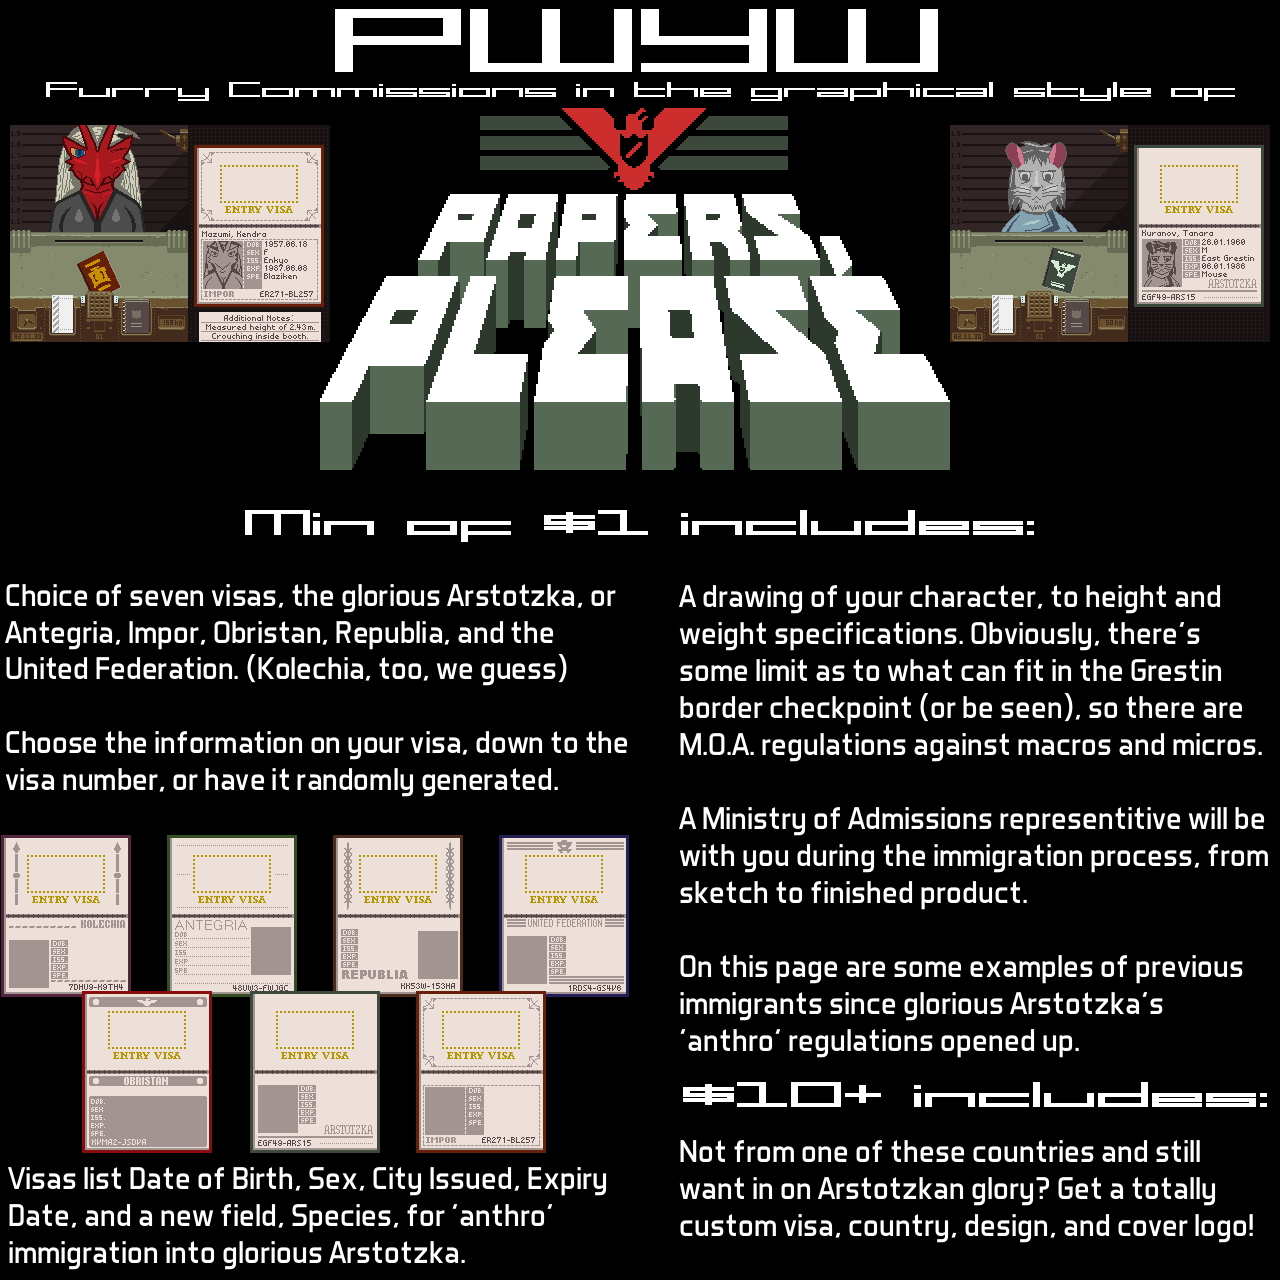 Papers Please Remastered